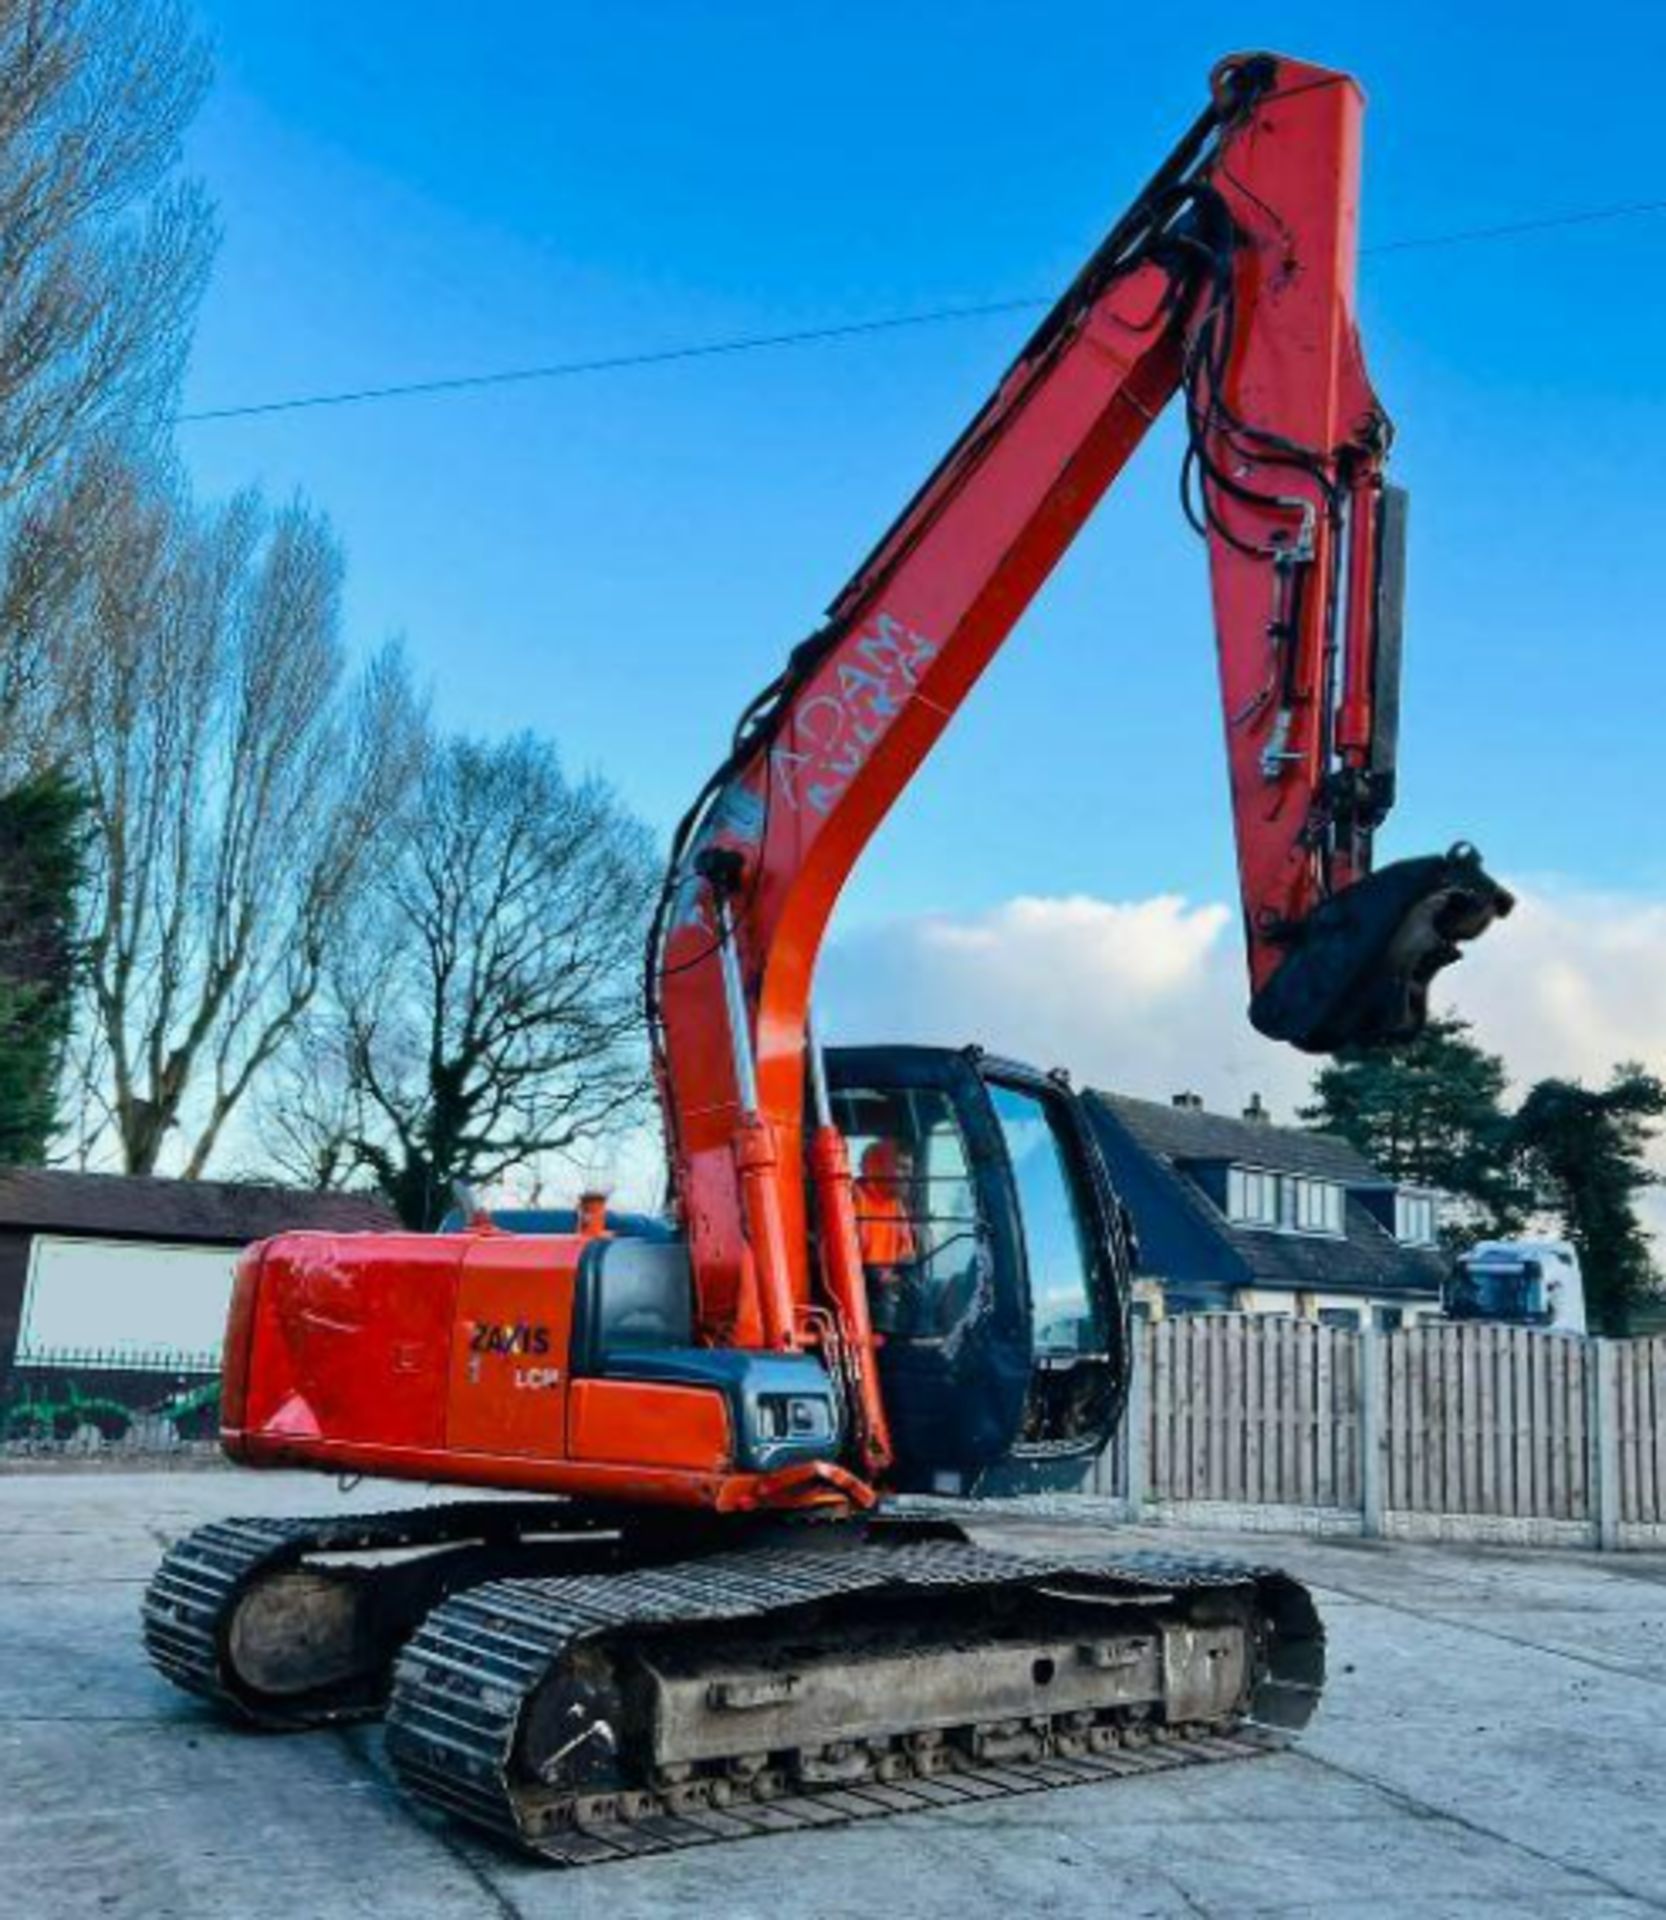 HITACHI ZAXIS ZX130LCN TRACKED EXCAVATOR C/W QUICK HITCH - Image 8 of 16